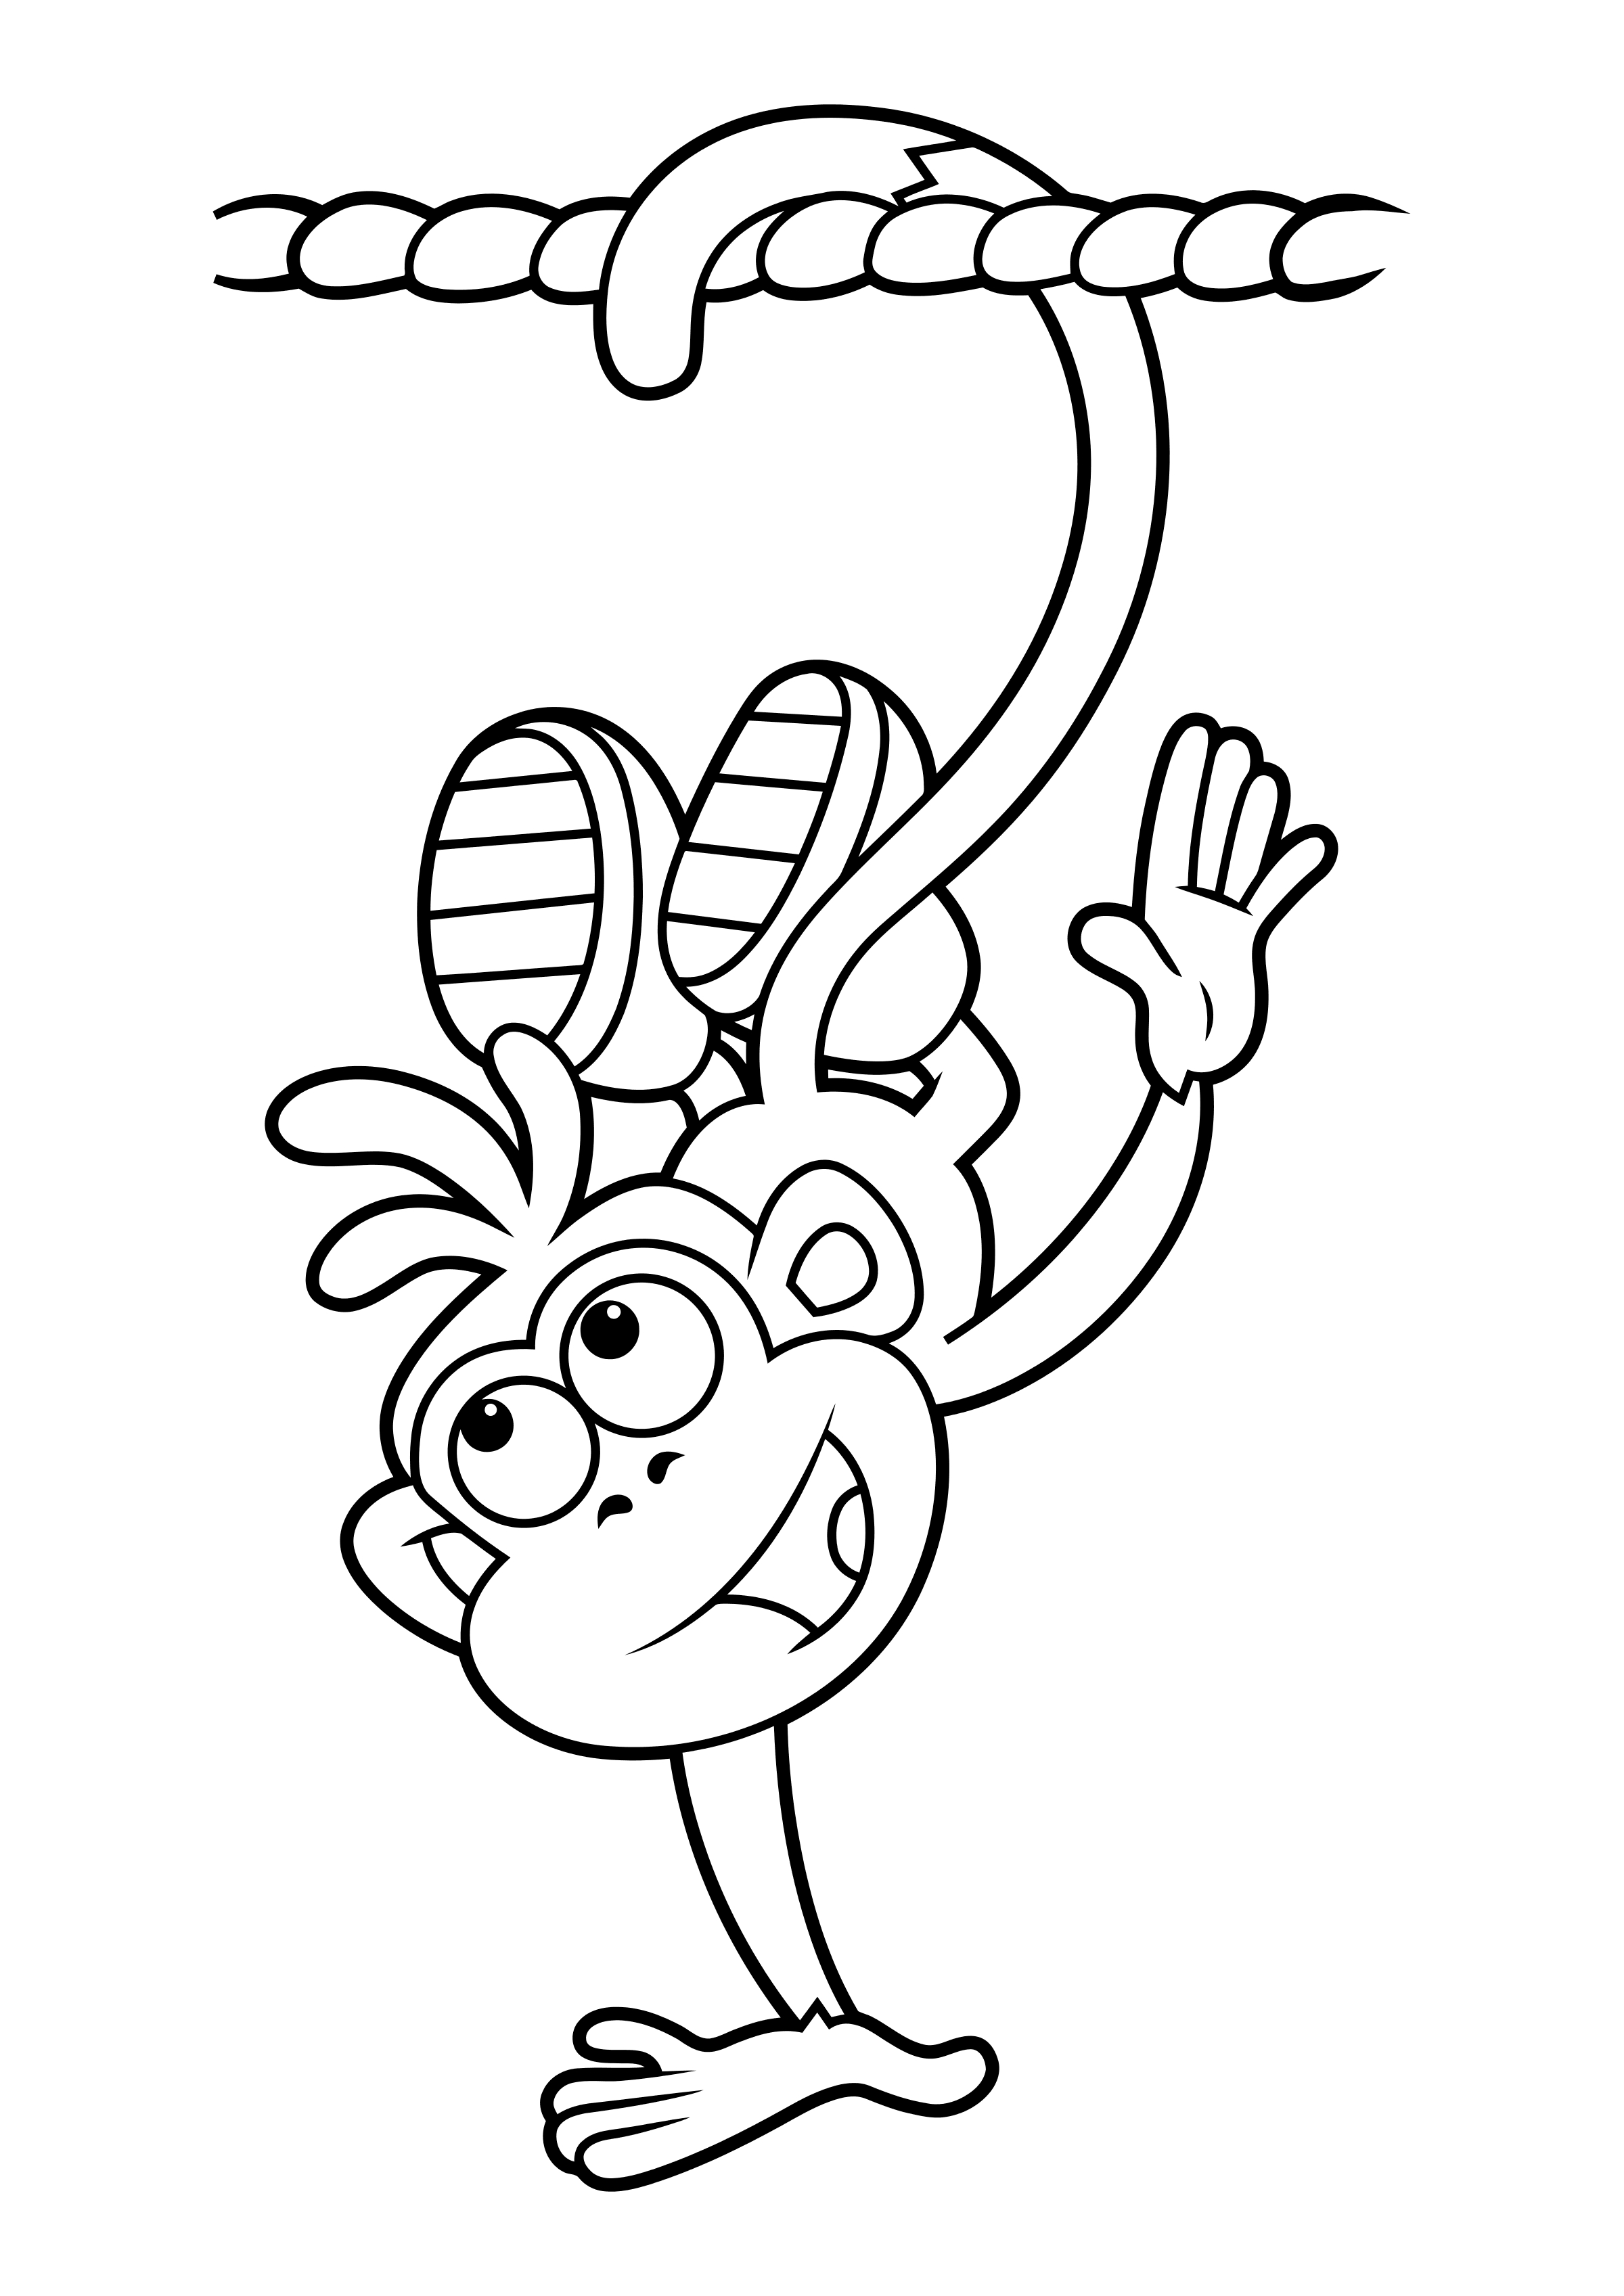 Coloring page Dora the Explorer Monkey on a tightrope